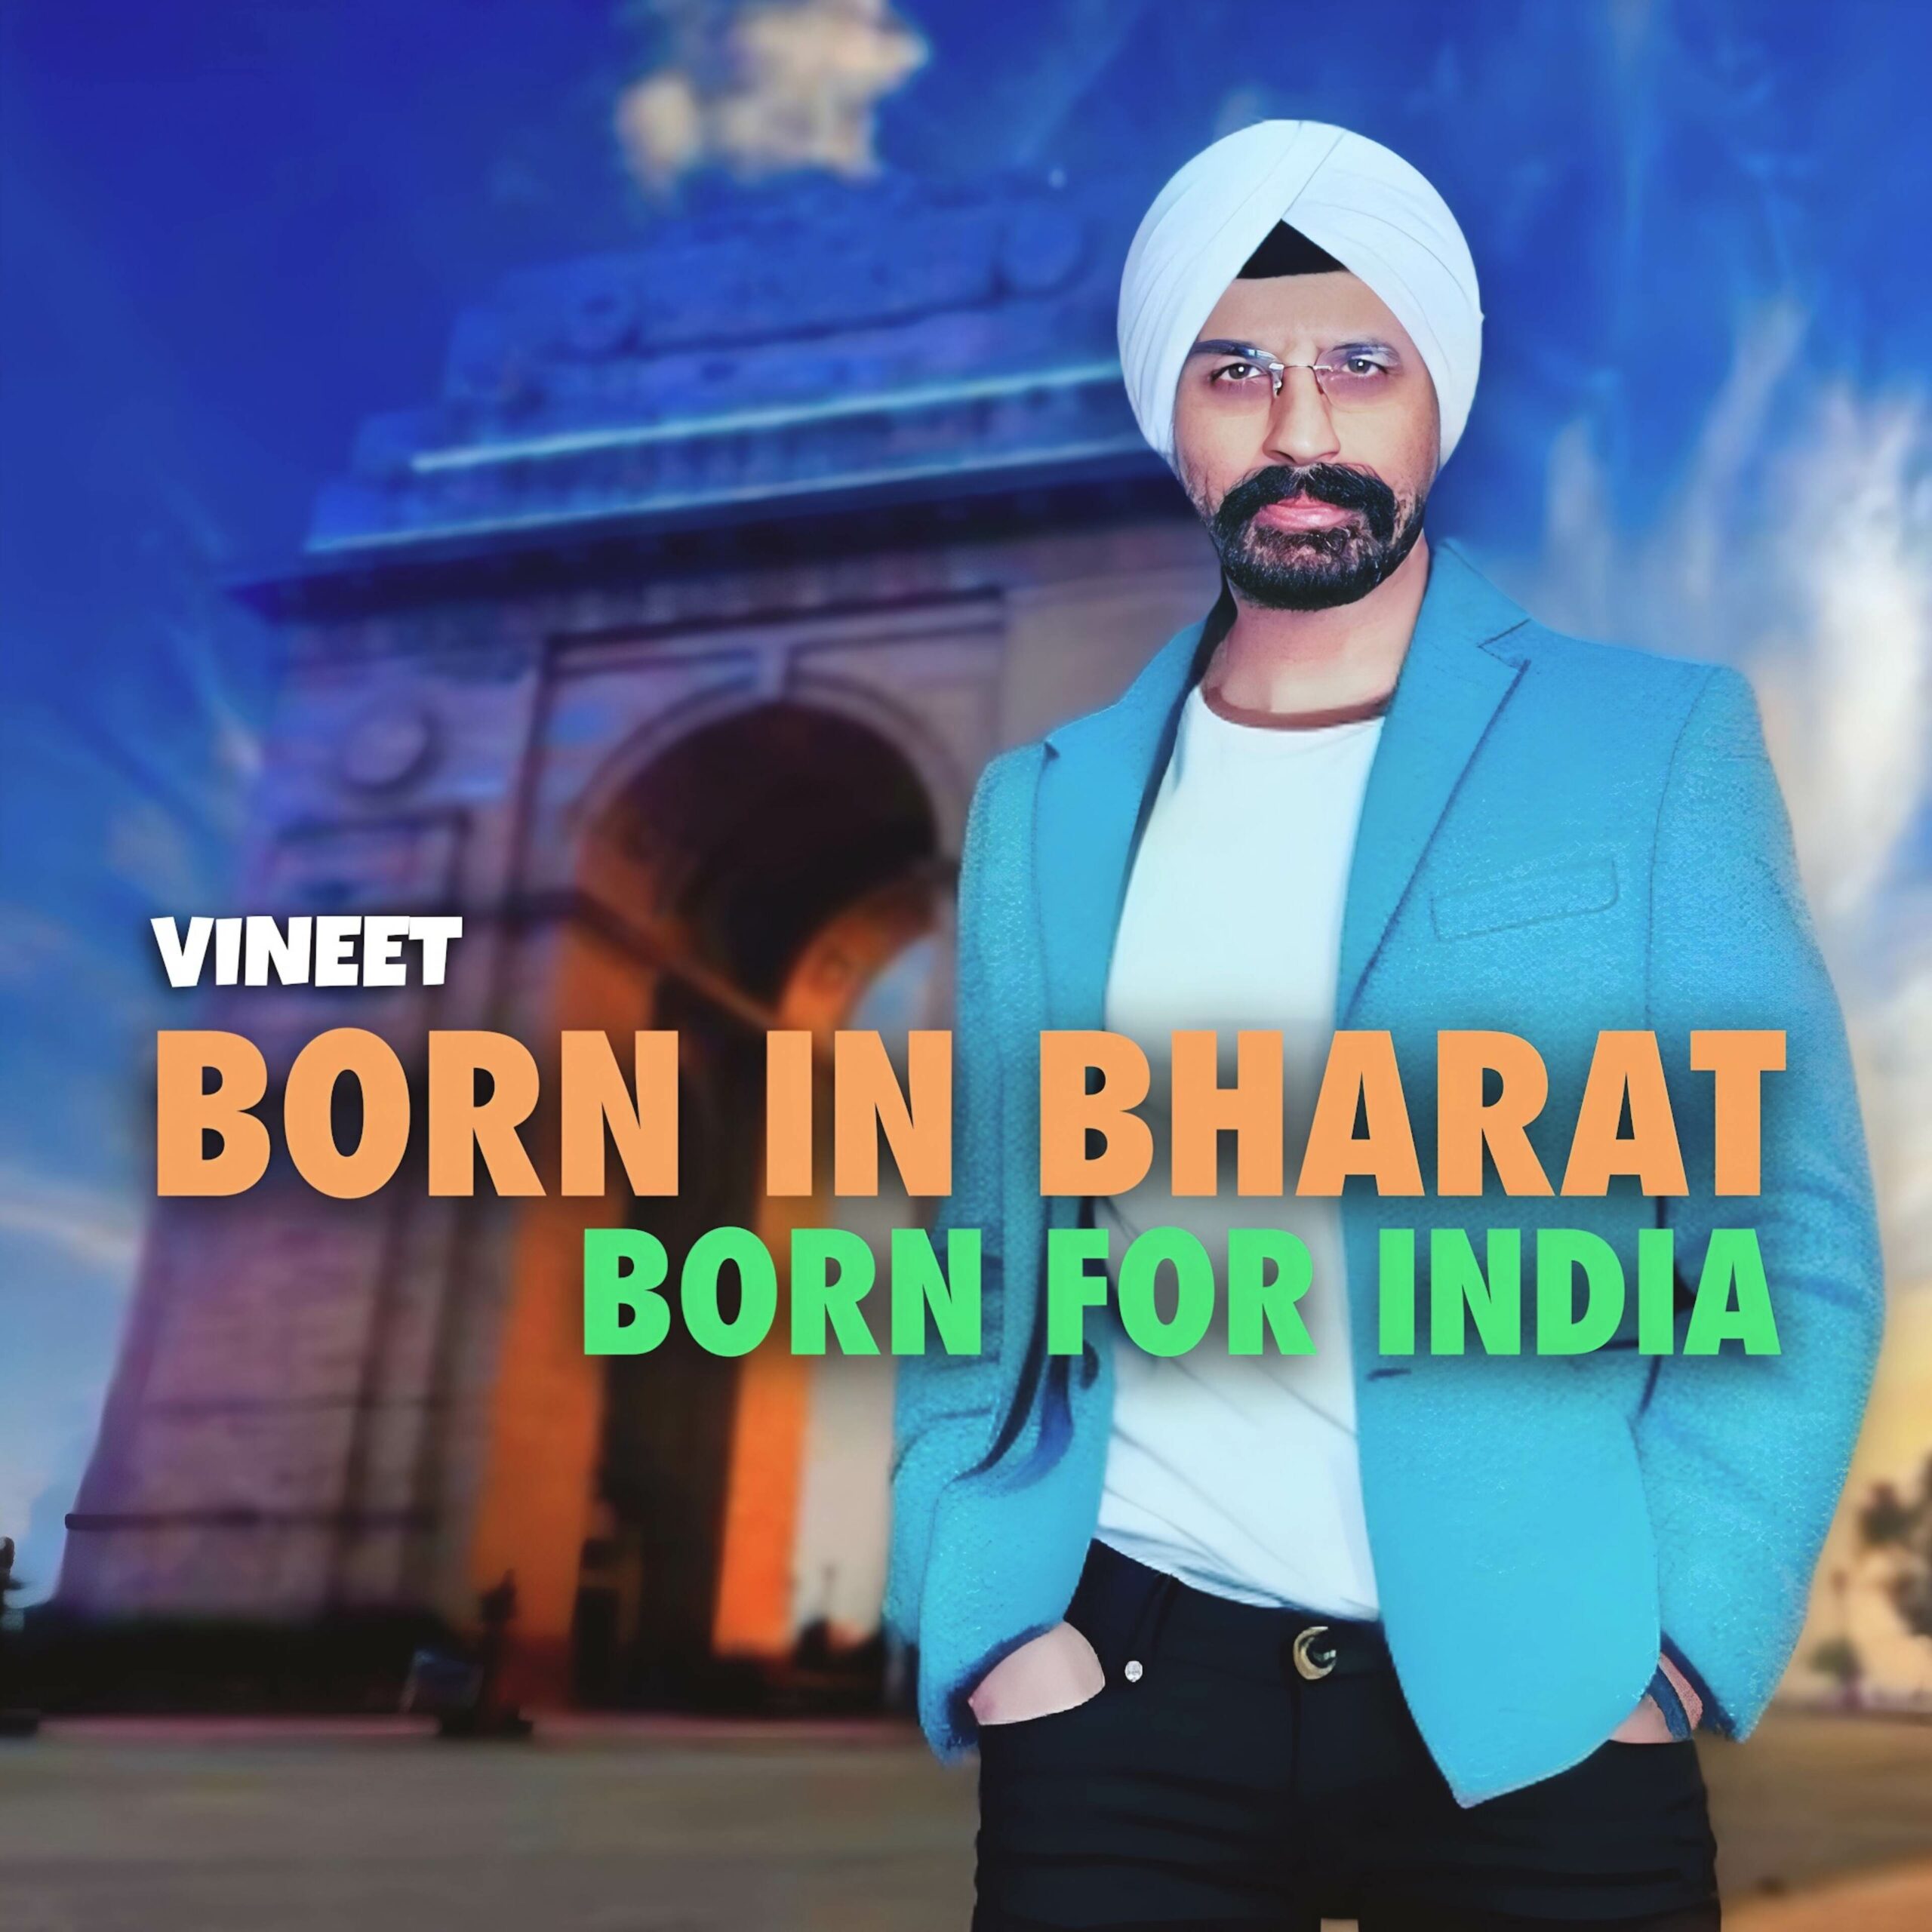 Vineet Singh Hukmani’s New Patriotic Anthem ‘Born In Bharat, Born For India’ Resonates with the Heartbeat of the NationIn a resonant tribute to the heartbeat of India, Vineet Singh Hukmani, the globally acclaimed singer-songwriter, is back with his latest release, ‘Born In Bharat, Born For India’. The patriotic-pop anthem stands as a celebration of the unyielding spirit and dedication of the every day Indian.